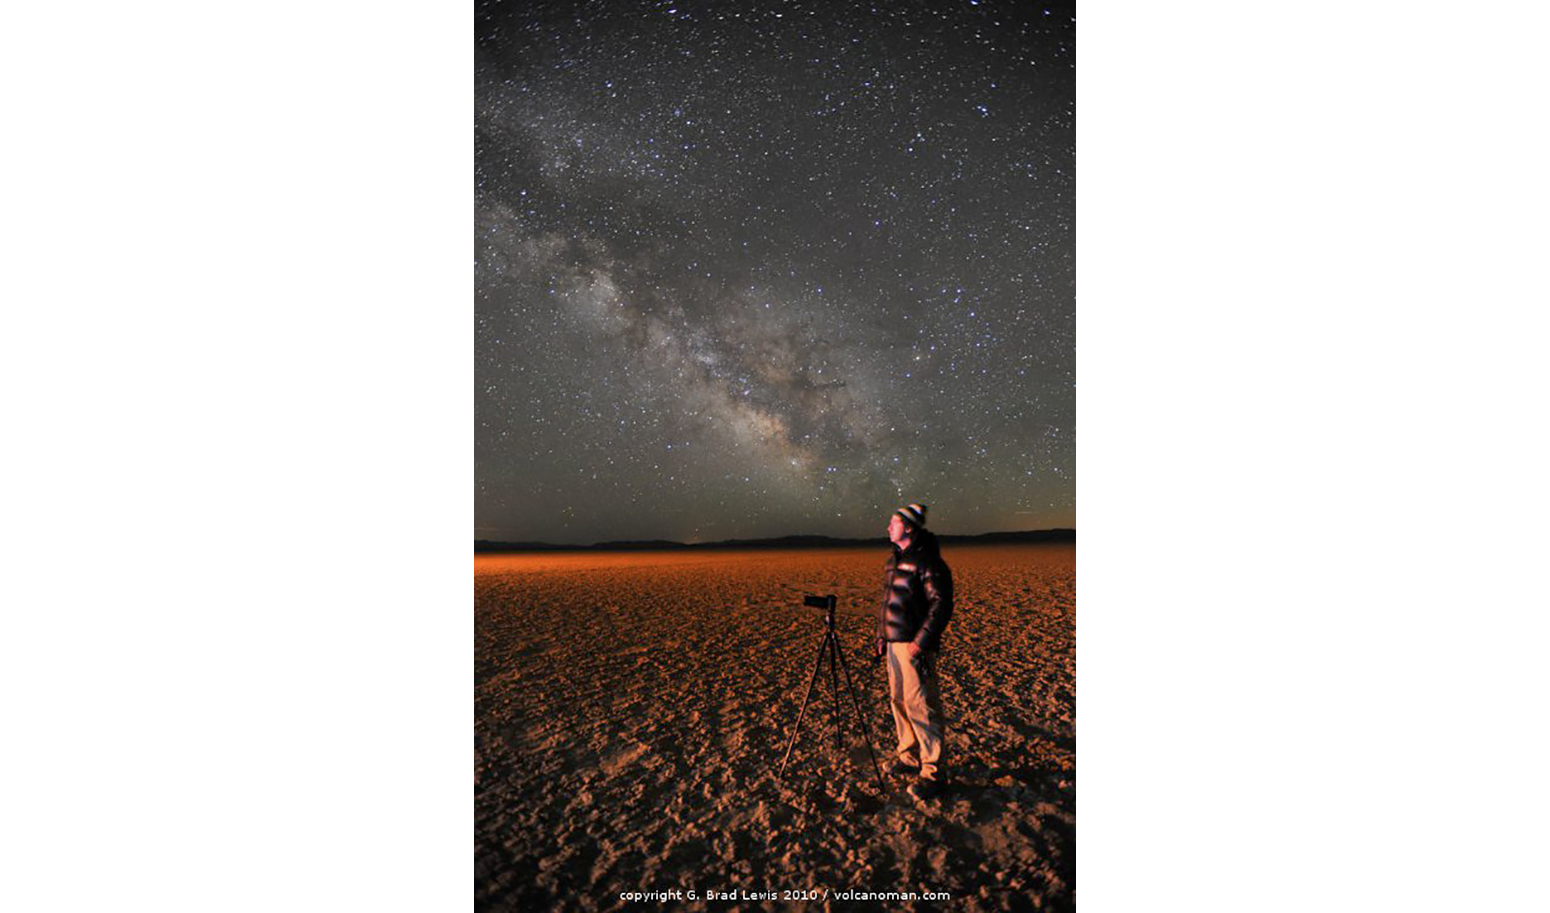 Grant Kaye, photographer, time lapse cinematographer, educator and Mountainsmith Ambassador pictured in the sand next to his tripod under a starry sky. 